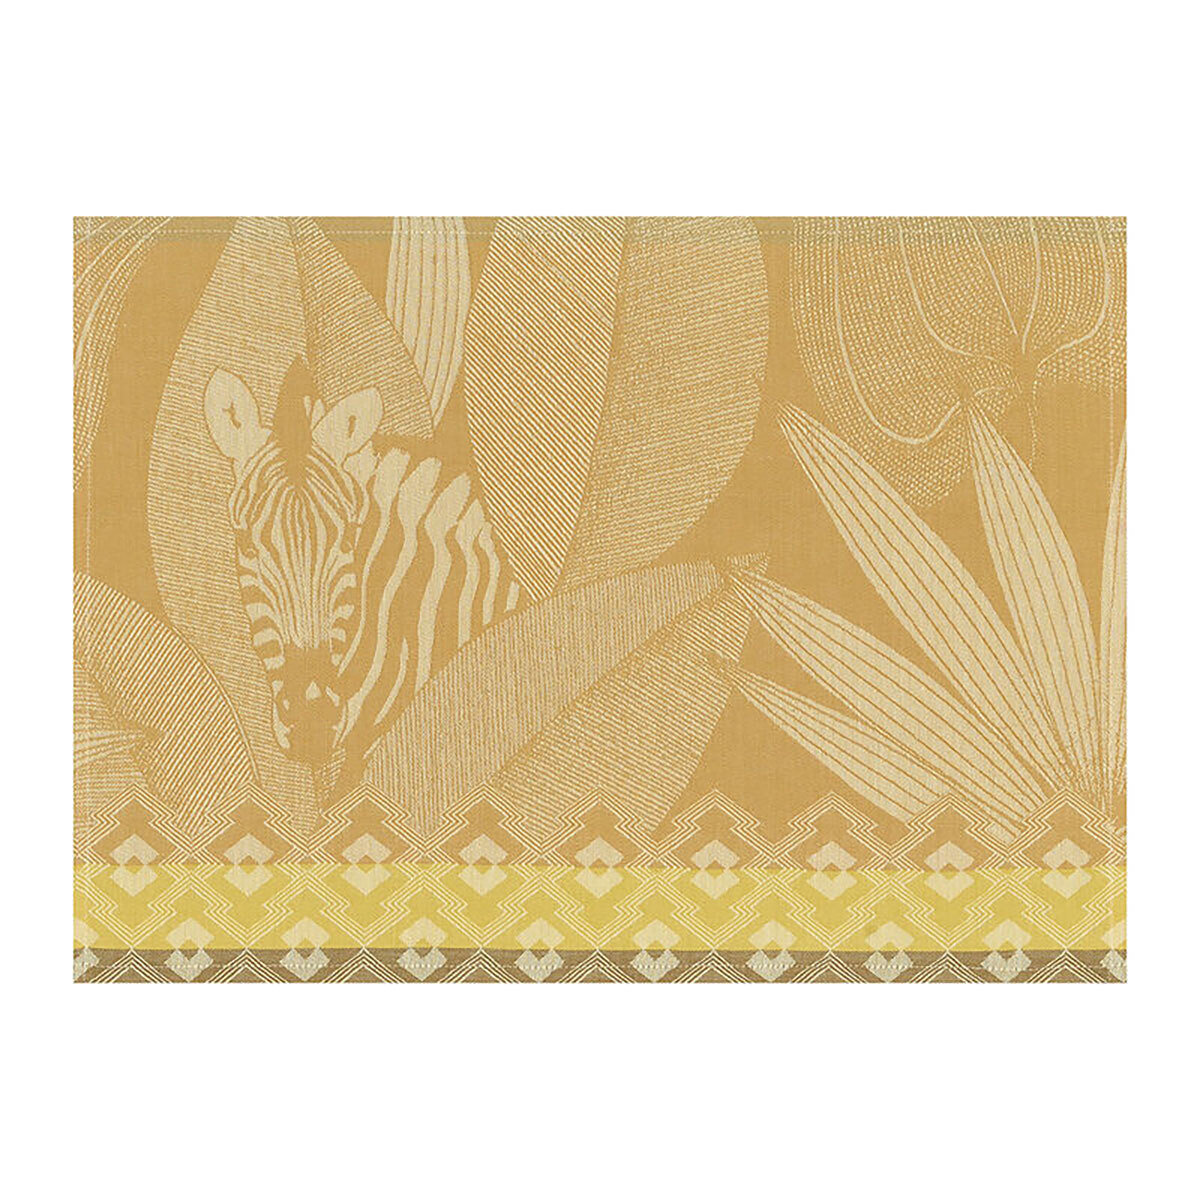 Le Jacquard Francais Nature Sauvage Yellow Placemat 20 x 14 Inch 27455 Set of 4